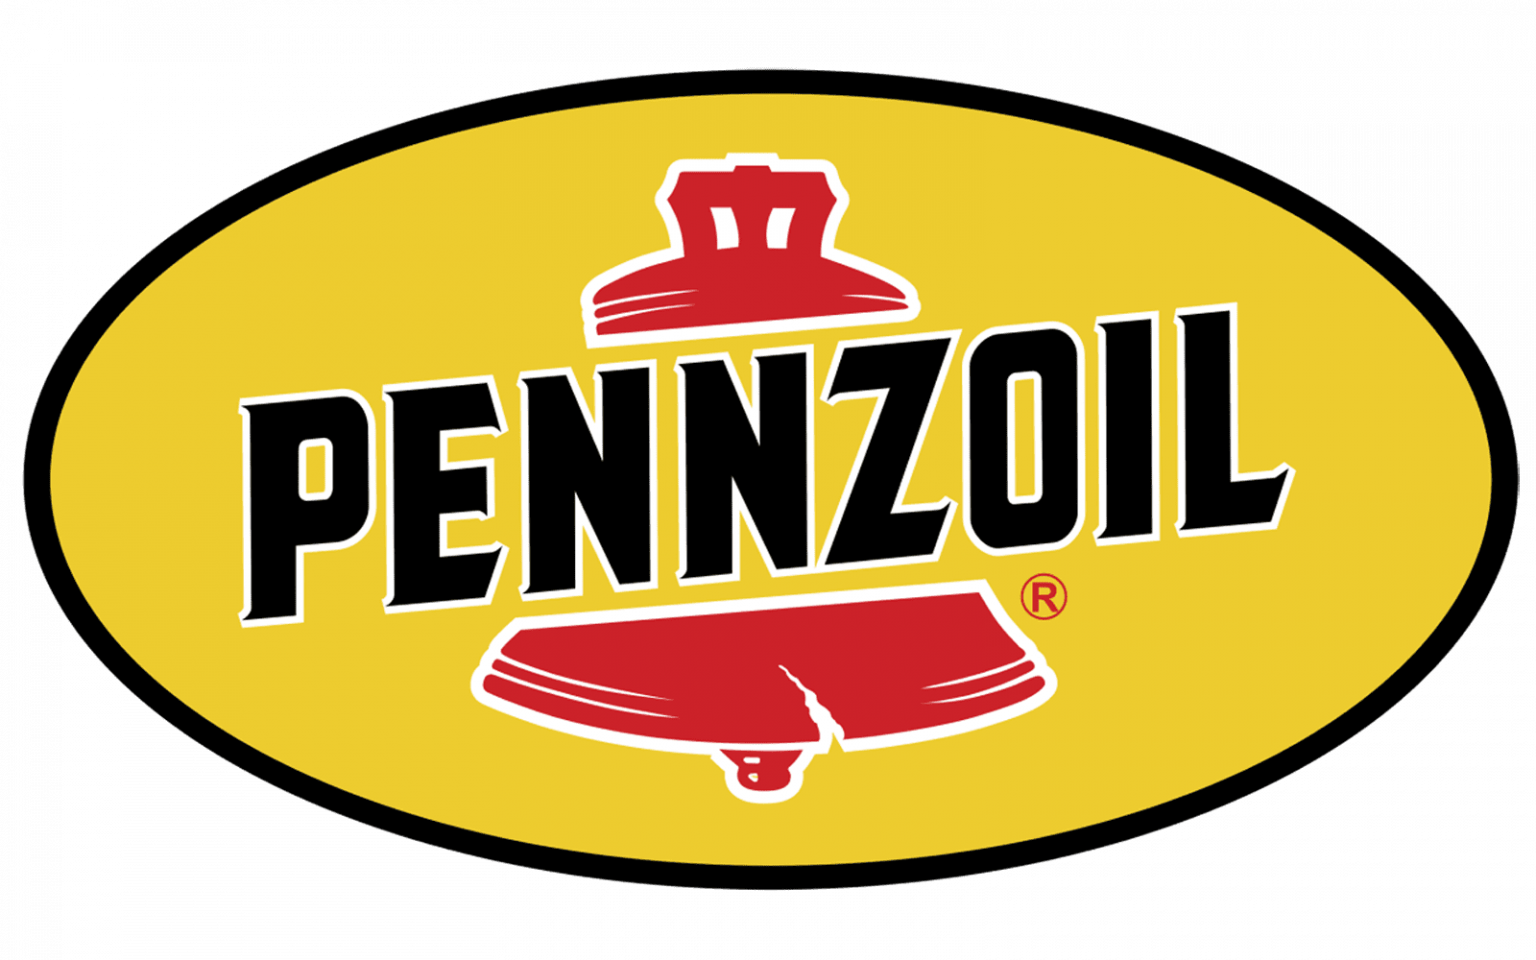 When Did Shell Buy Pennzoil